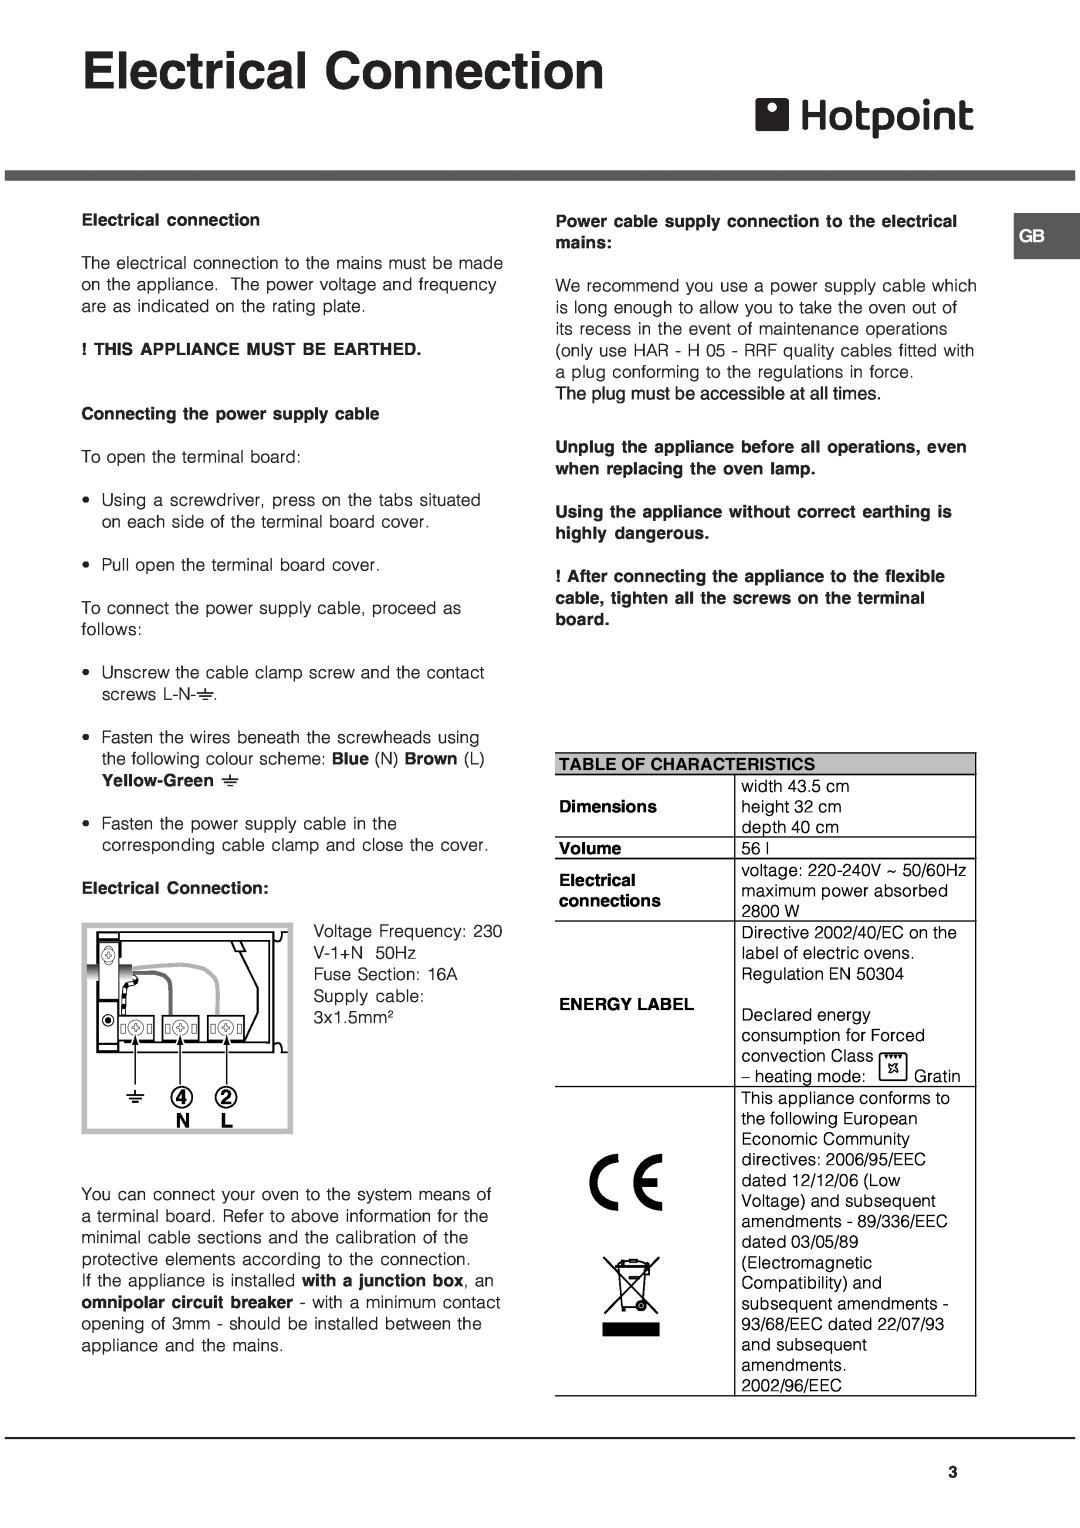 Hotpoint SE101PGX manual Electrical Connection, 4 2 N L, The plug must be accessible at all times 